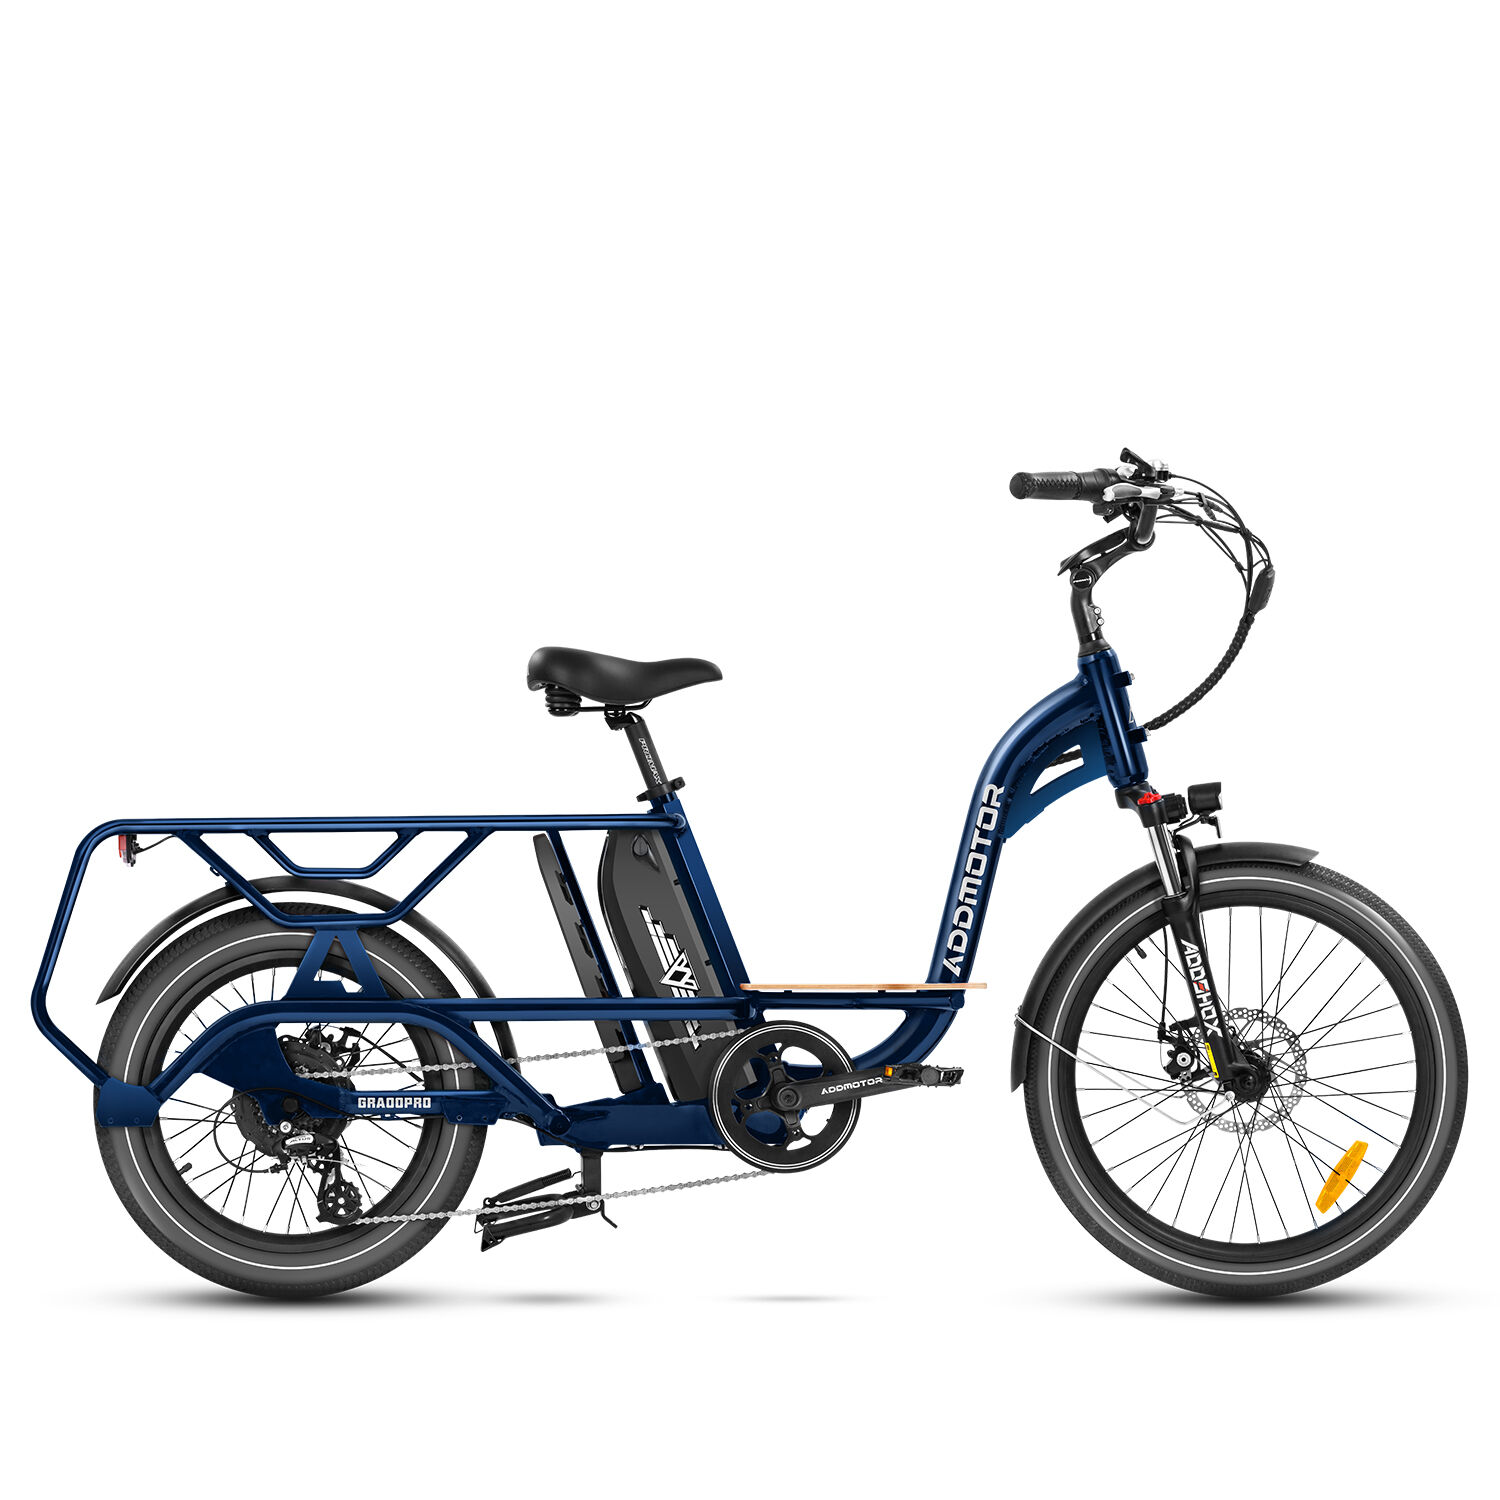 Addmotor Graoopro Ebike   Best Dual Battery Electric Bikes   Adults Cargo Electric Bicycle   Up To 210+ Miles   Starry Blue + Single-Battery